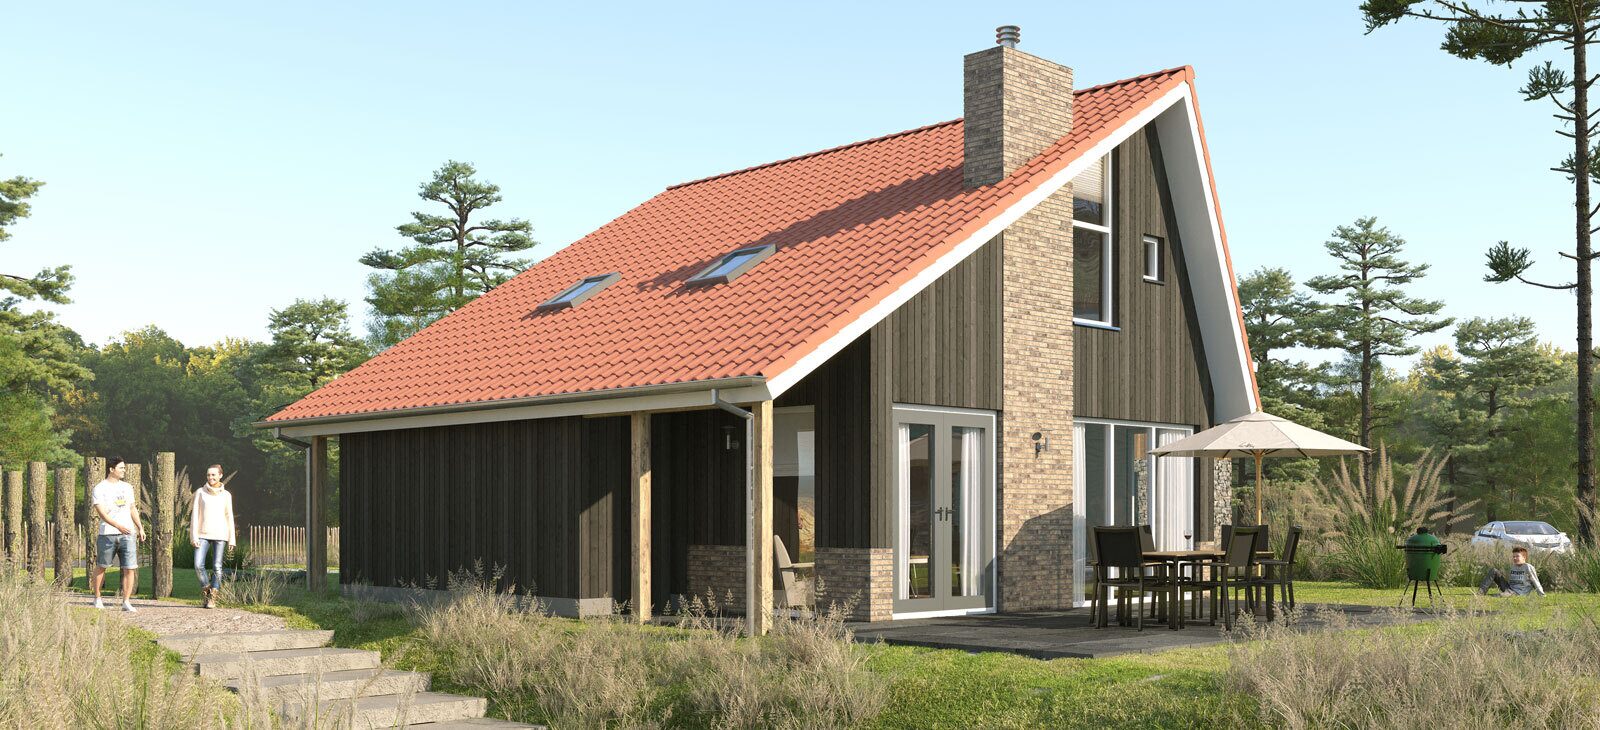 Purchasing a holiday home Netherlands